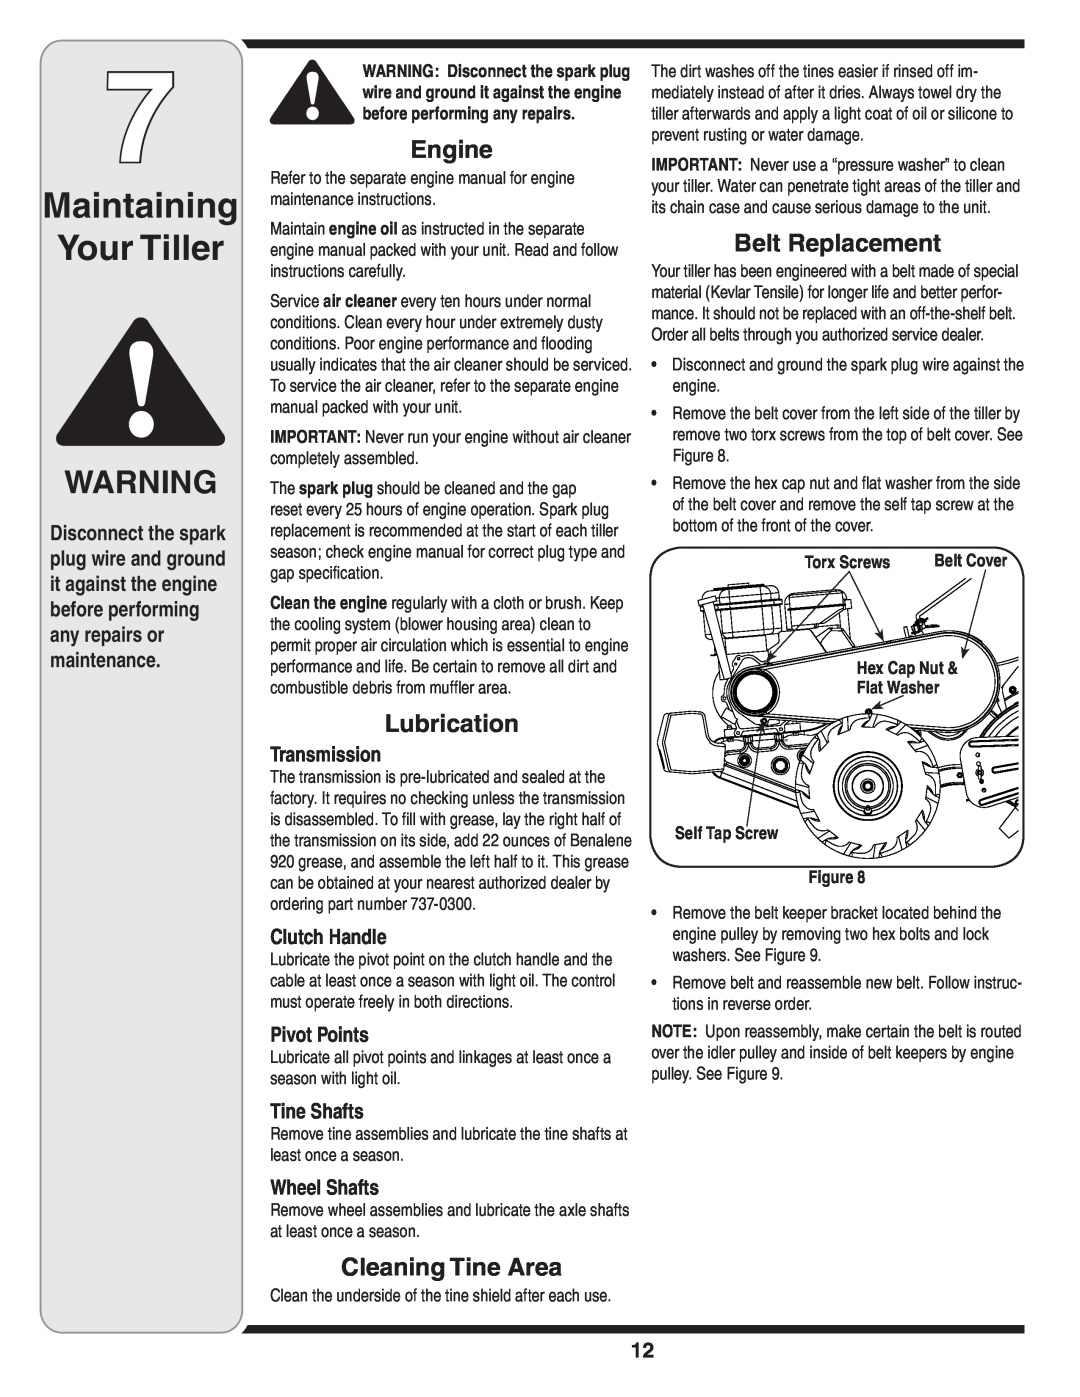 Cub Cadet 450 warranty Maintaining Your Tiller, Engine, Lubrication, Cleaning Tine Area, Belt Replacement, Transmission 